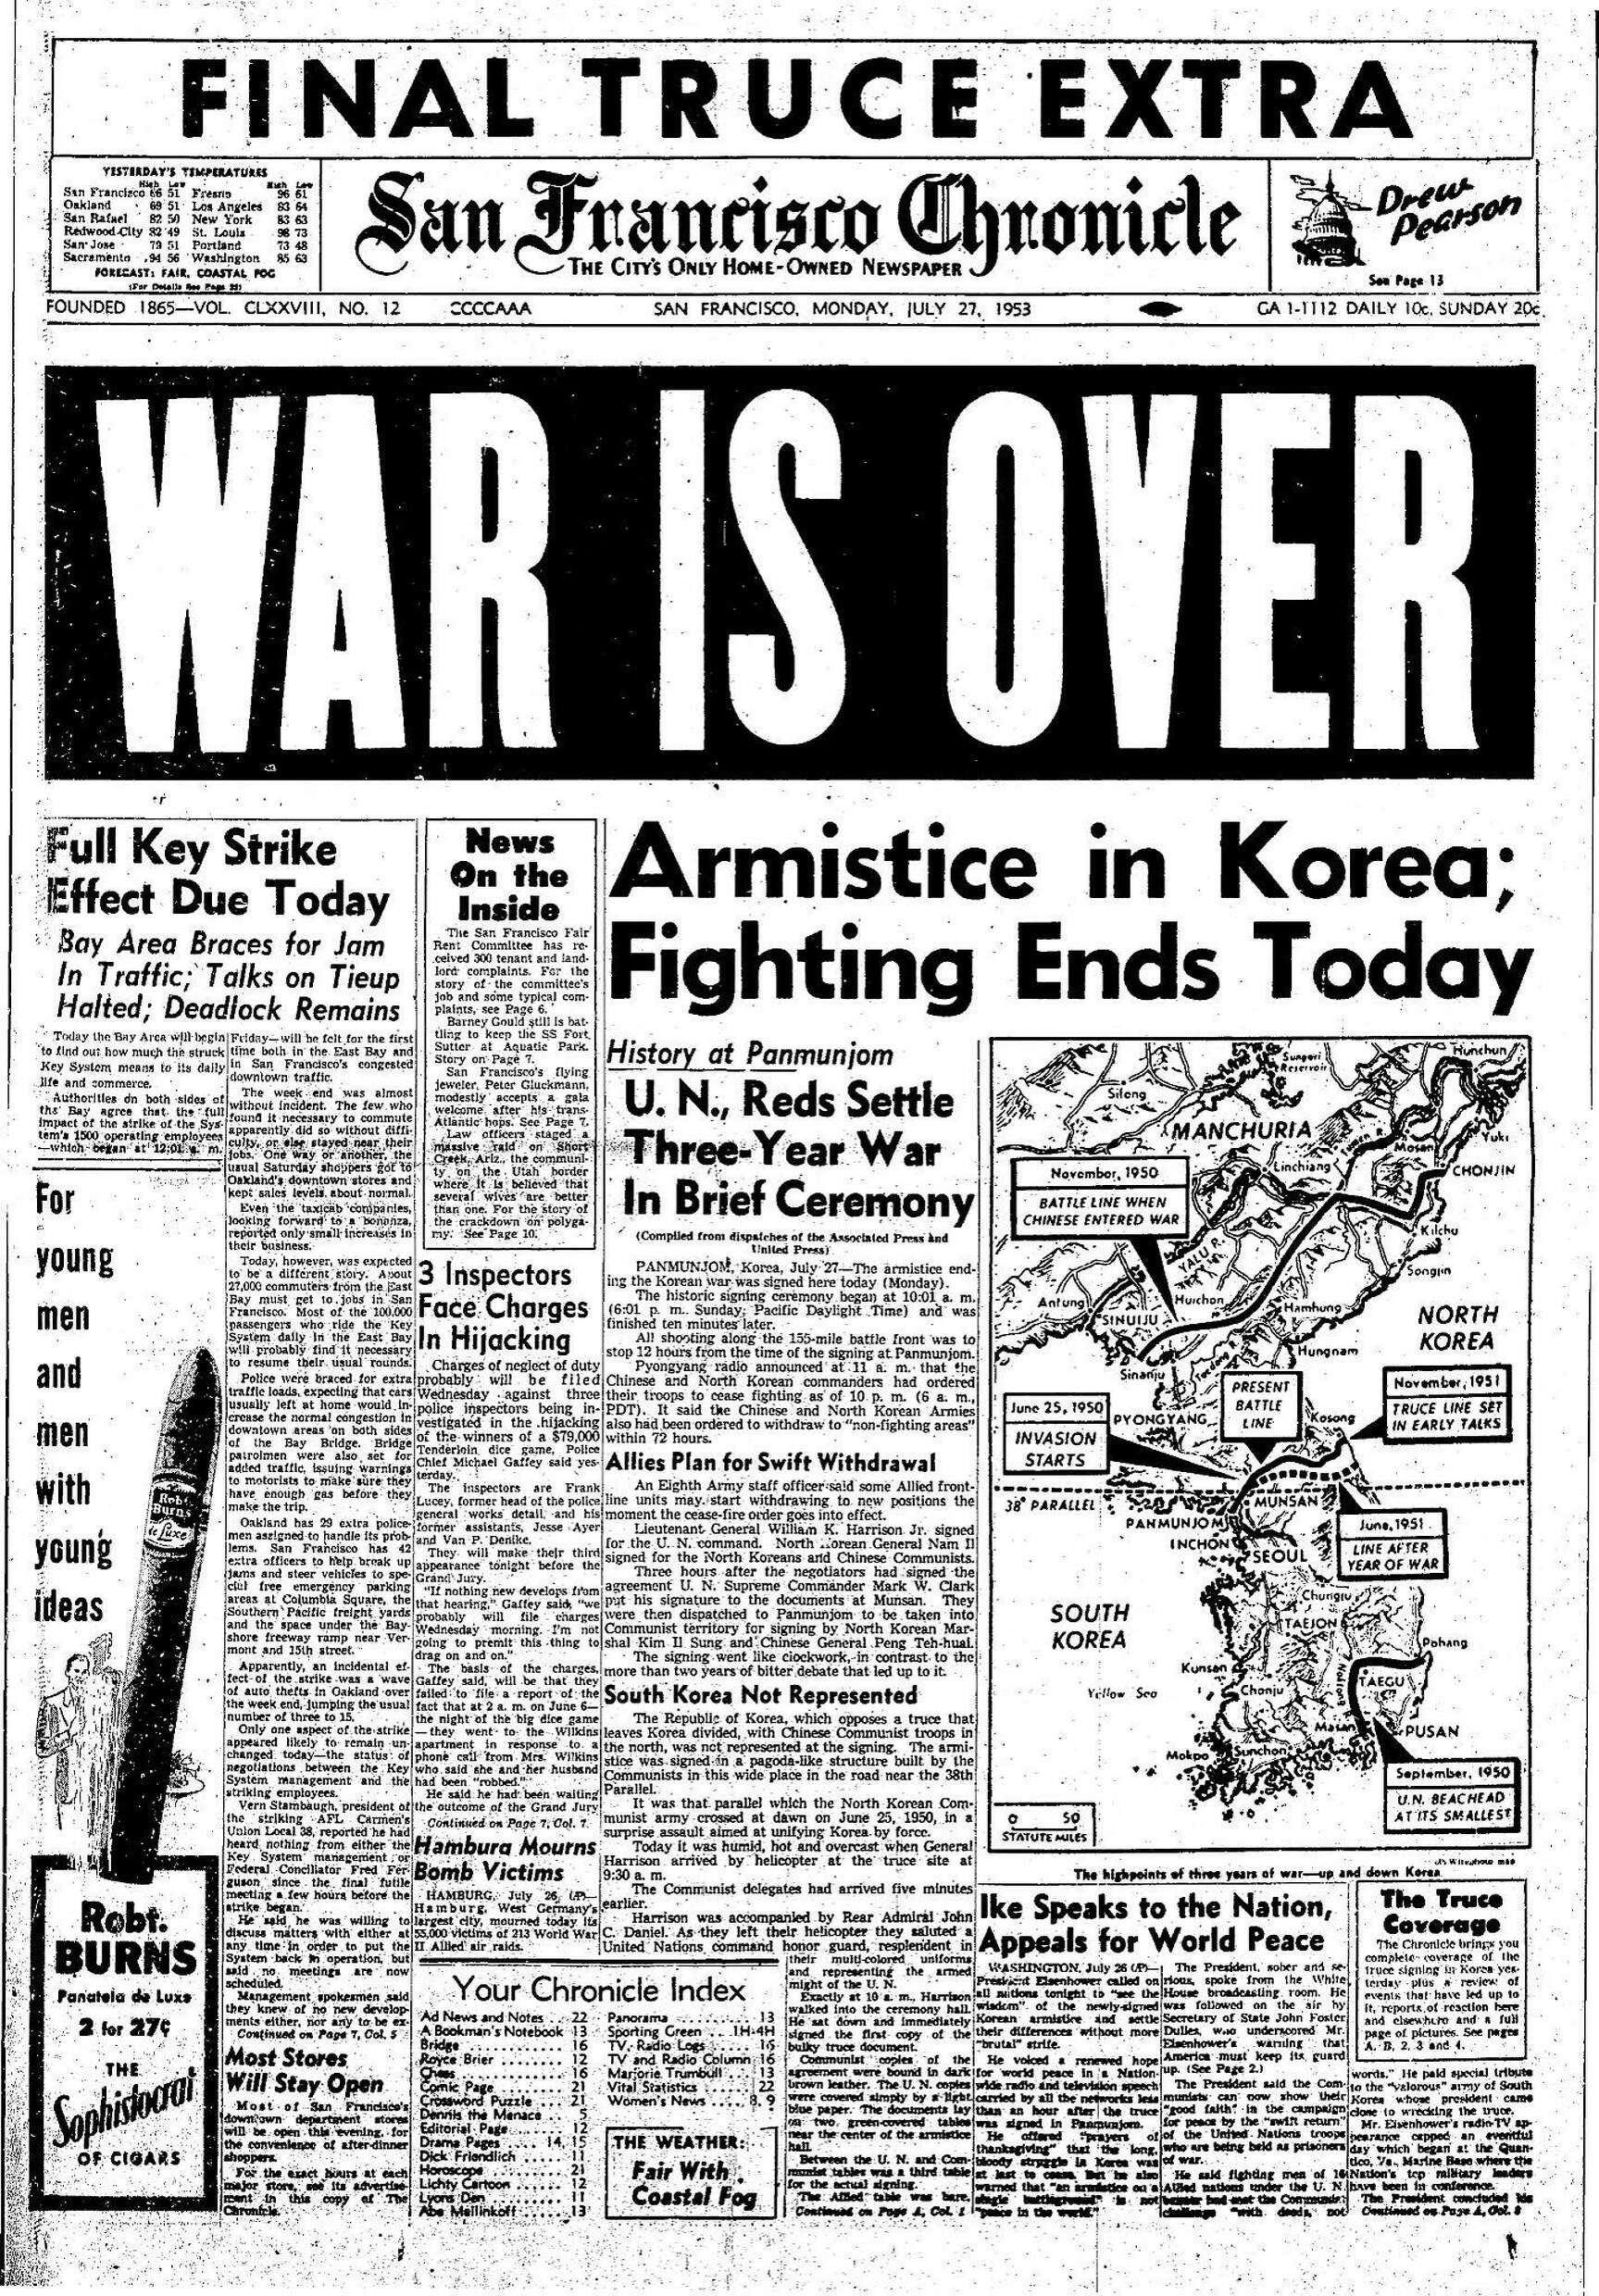 Chronicle Covers: The disputed end to the Korean War - SFChronicle.com